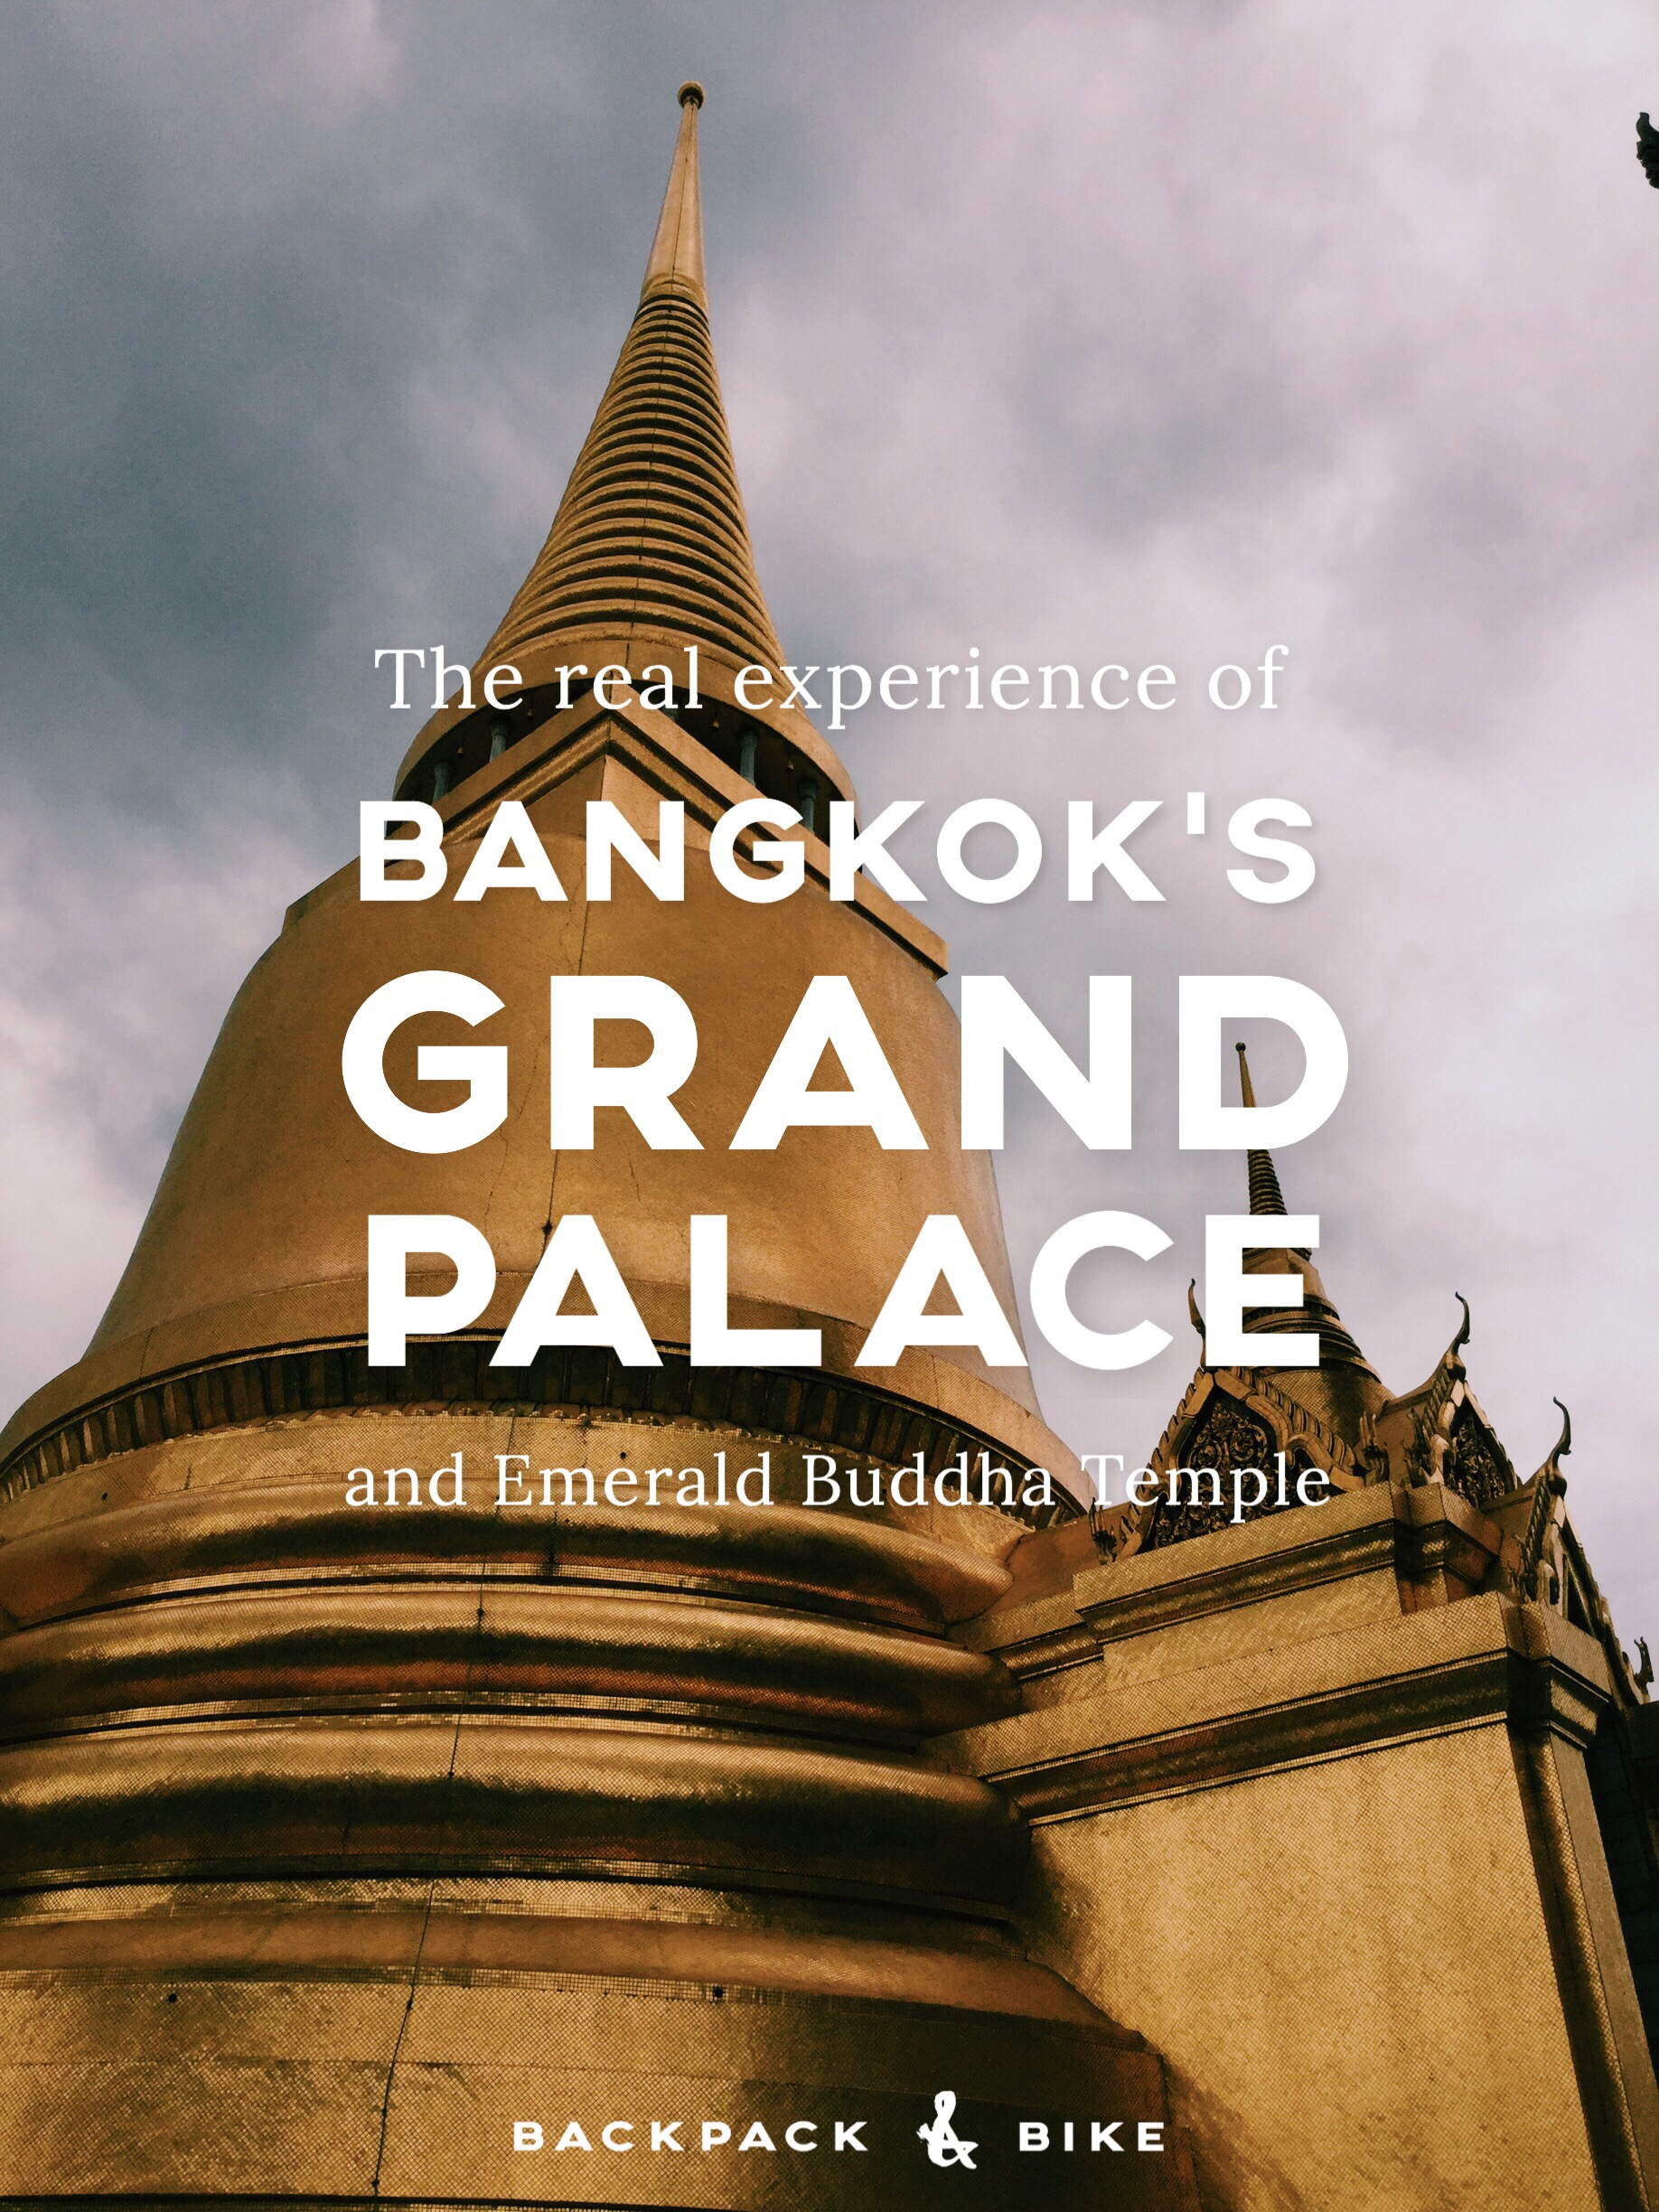 The real experience of Bangkok's Grand Palace and Emerald Buddha Temple